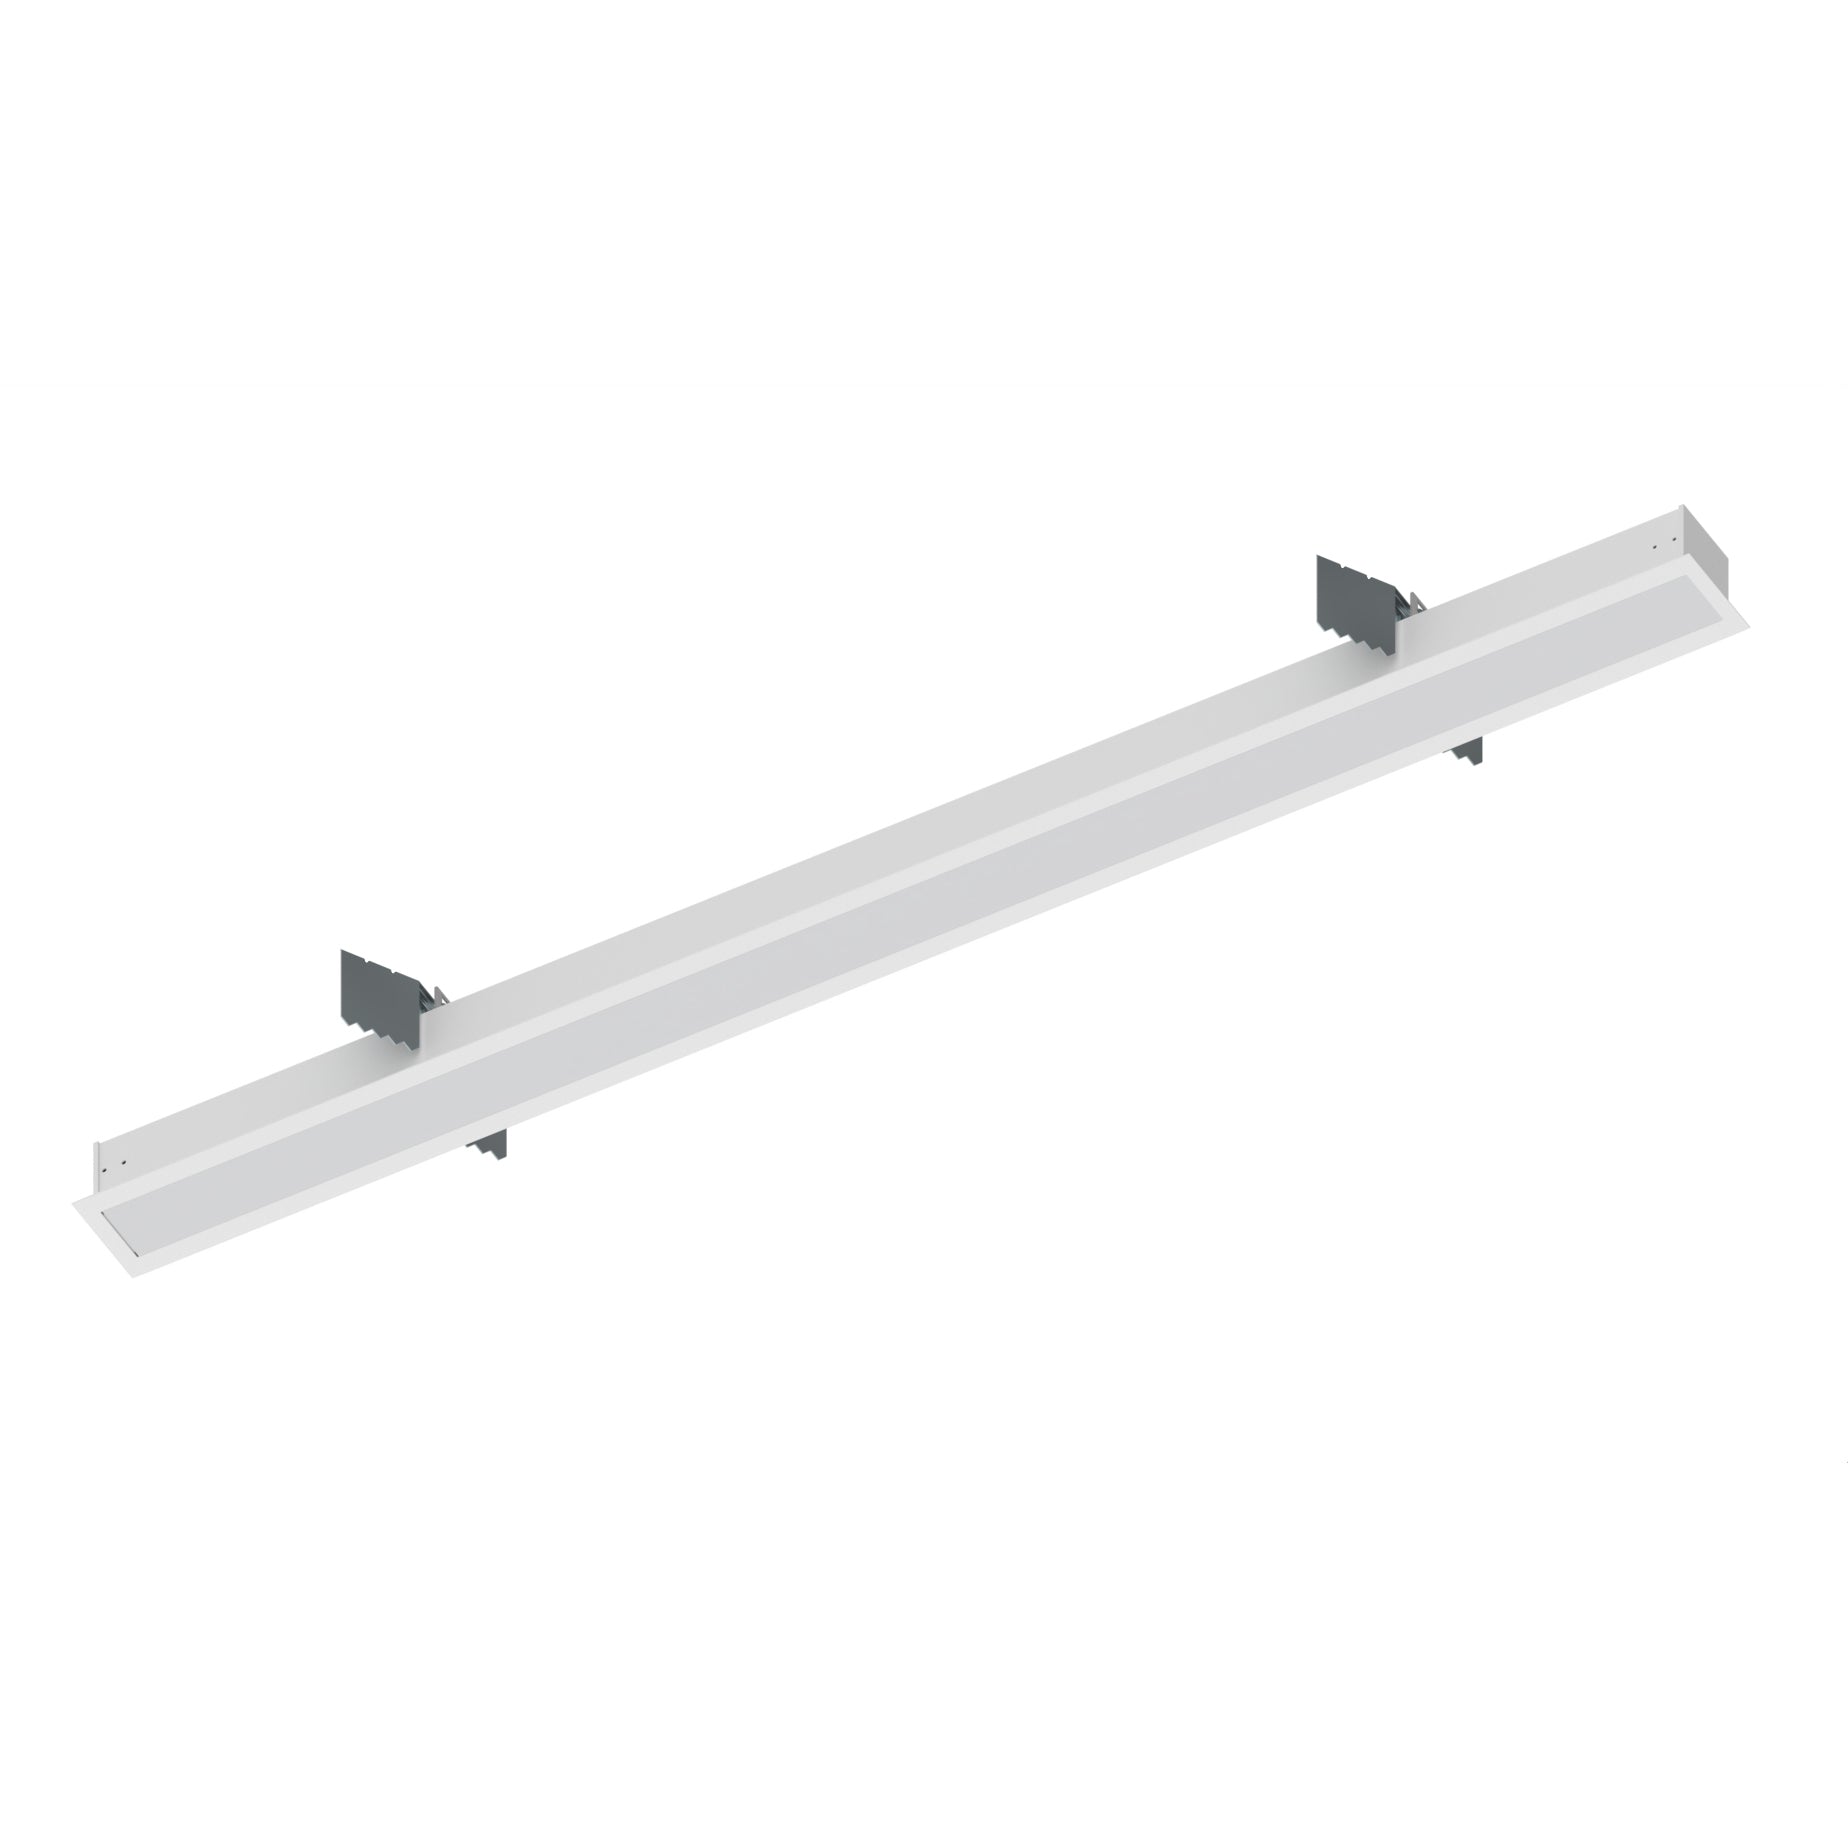 Nora Lighting NRLIN-41030W - Linear - 4' L-Line LED Recessed Linear, 4200lm / 3000K, White Finish